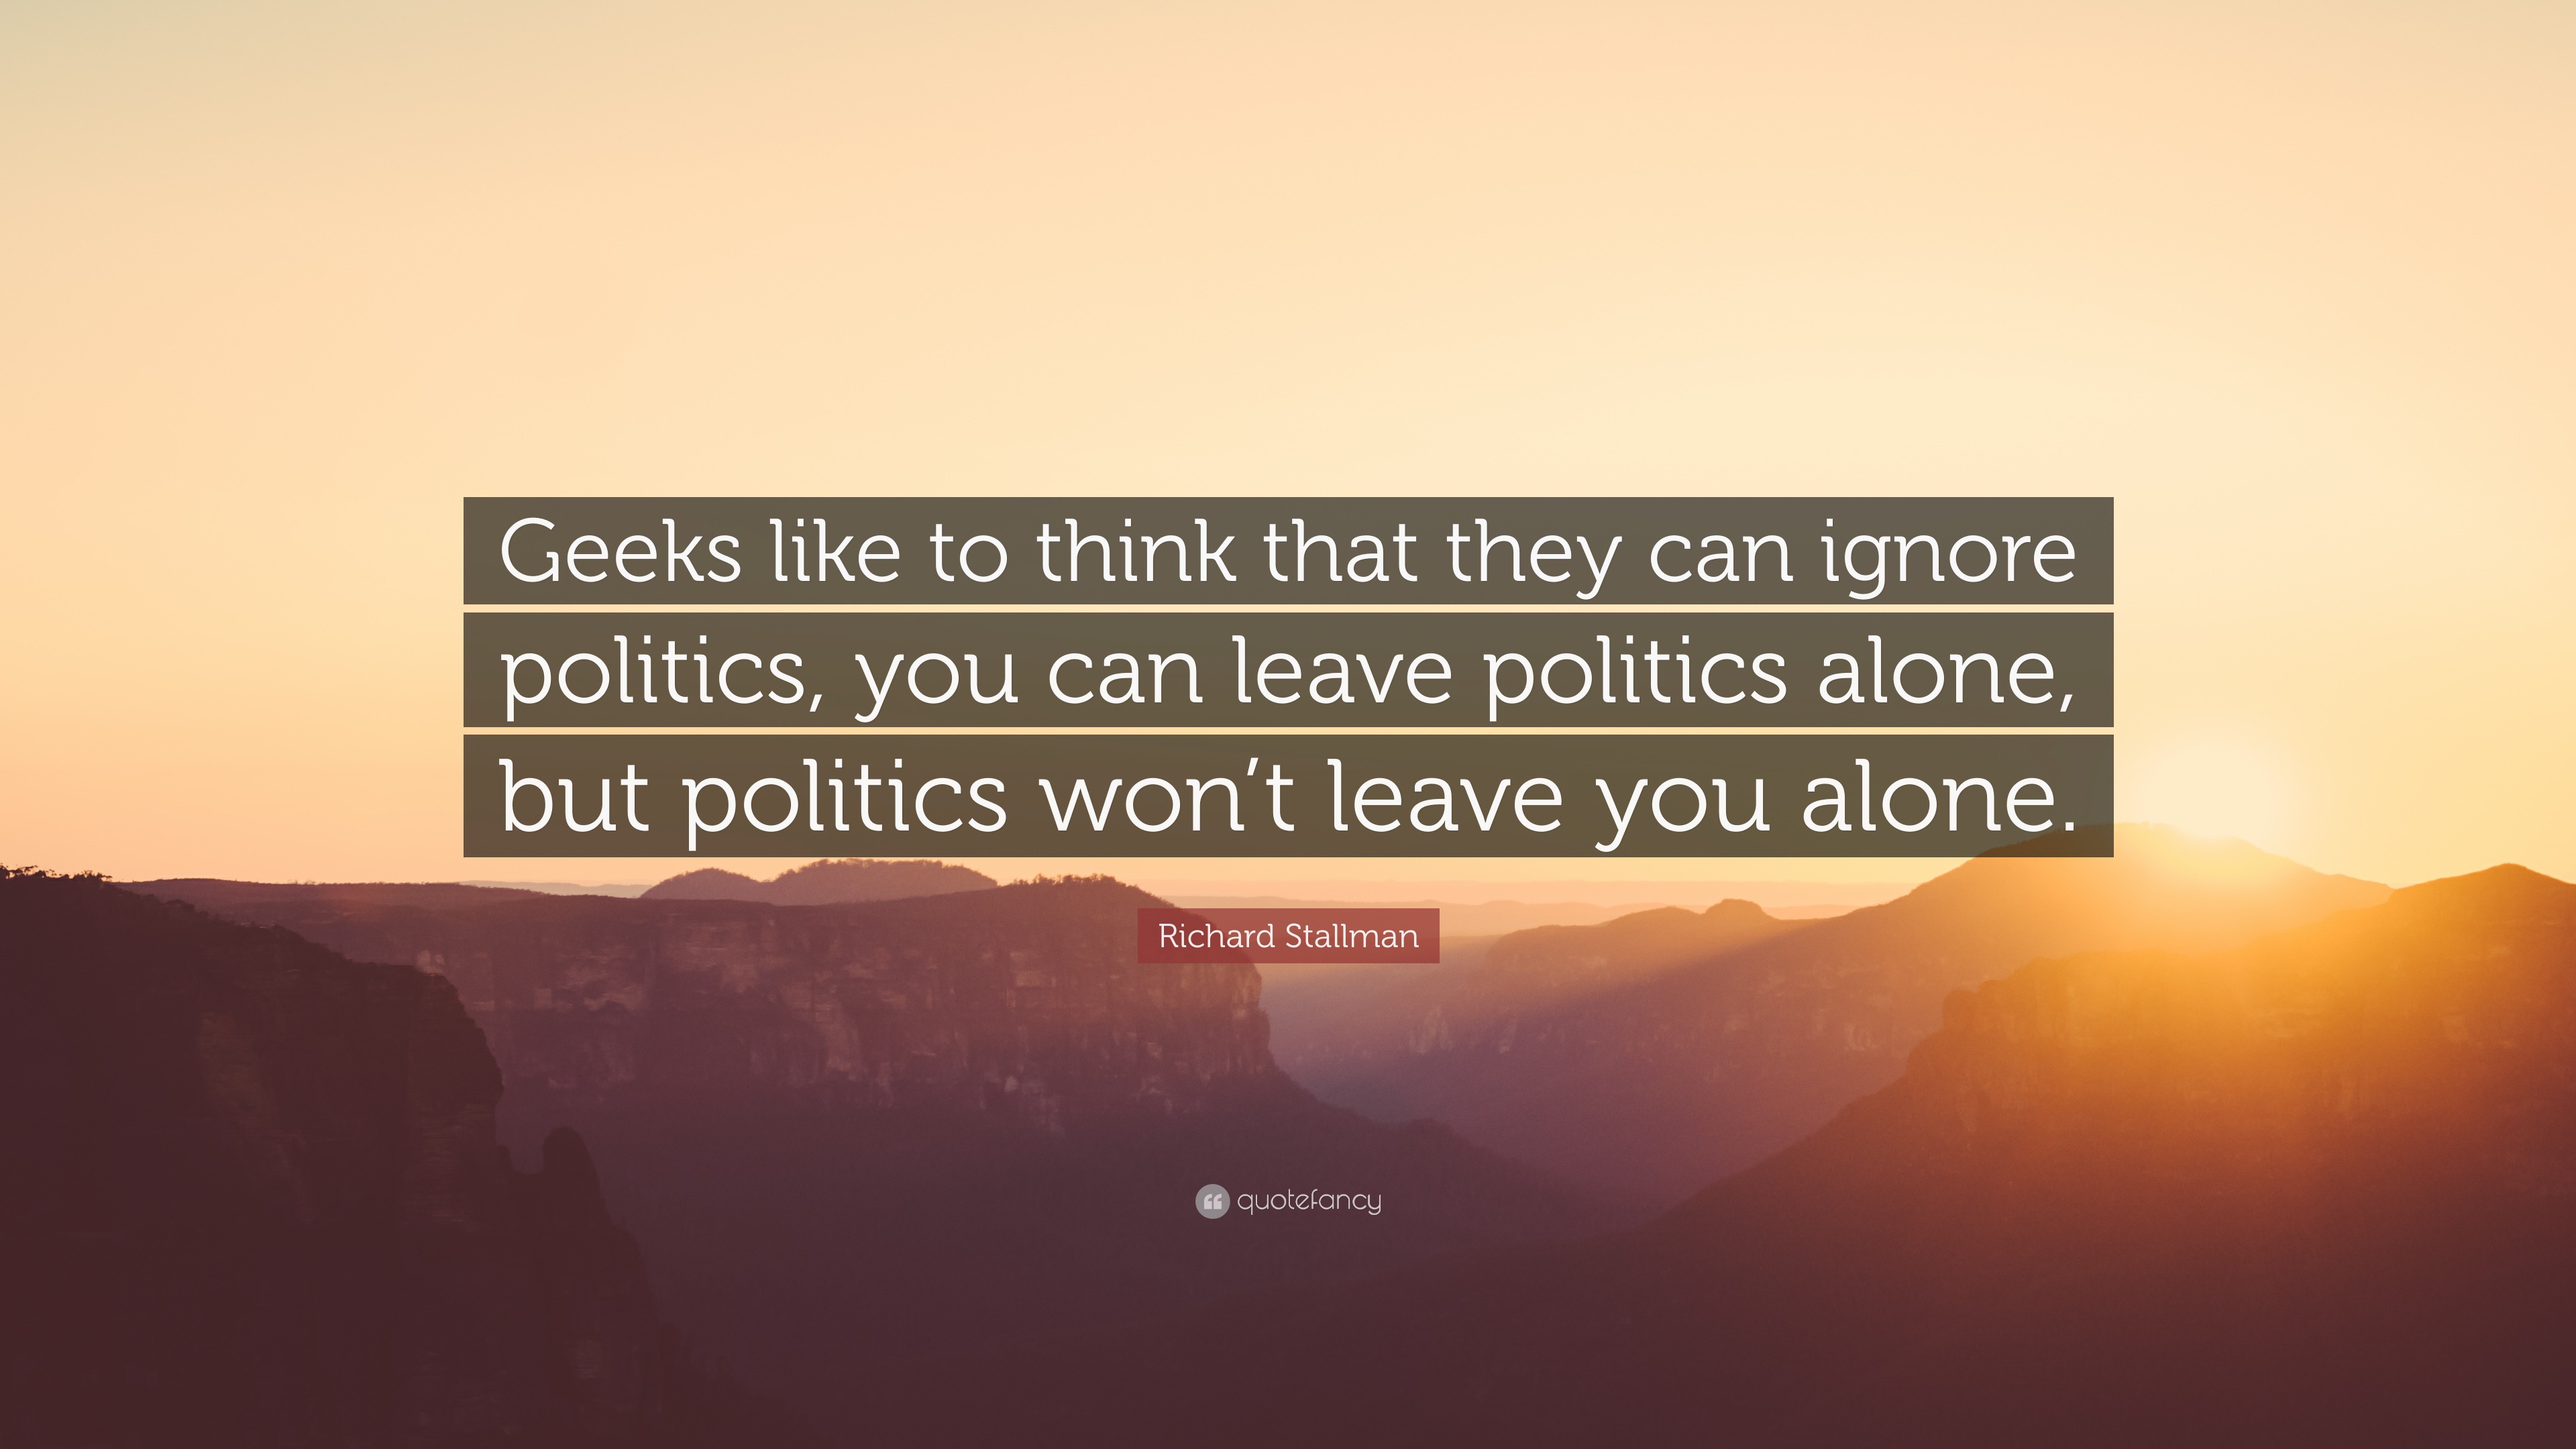 Richard Stallman Quote Geeks Like To Think That They Can Ignore Politics You Can Leave Politics Alone But Politics Won T Leave You Alone 7 Wallpapers Quotefancy